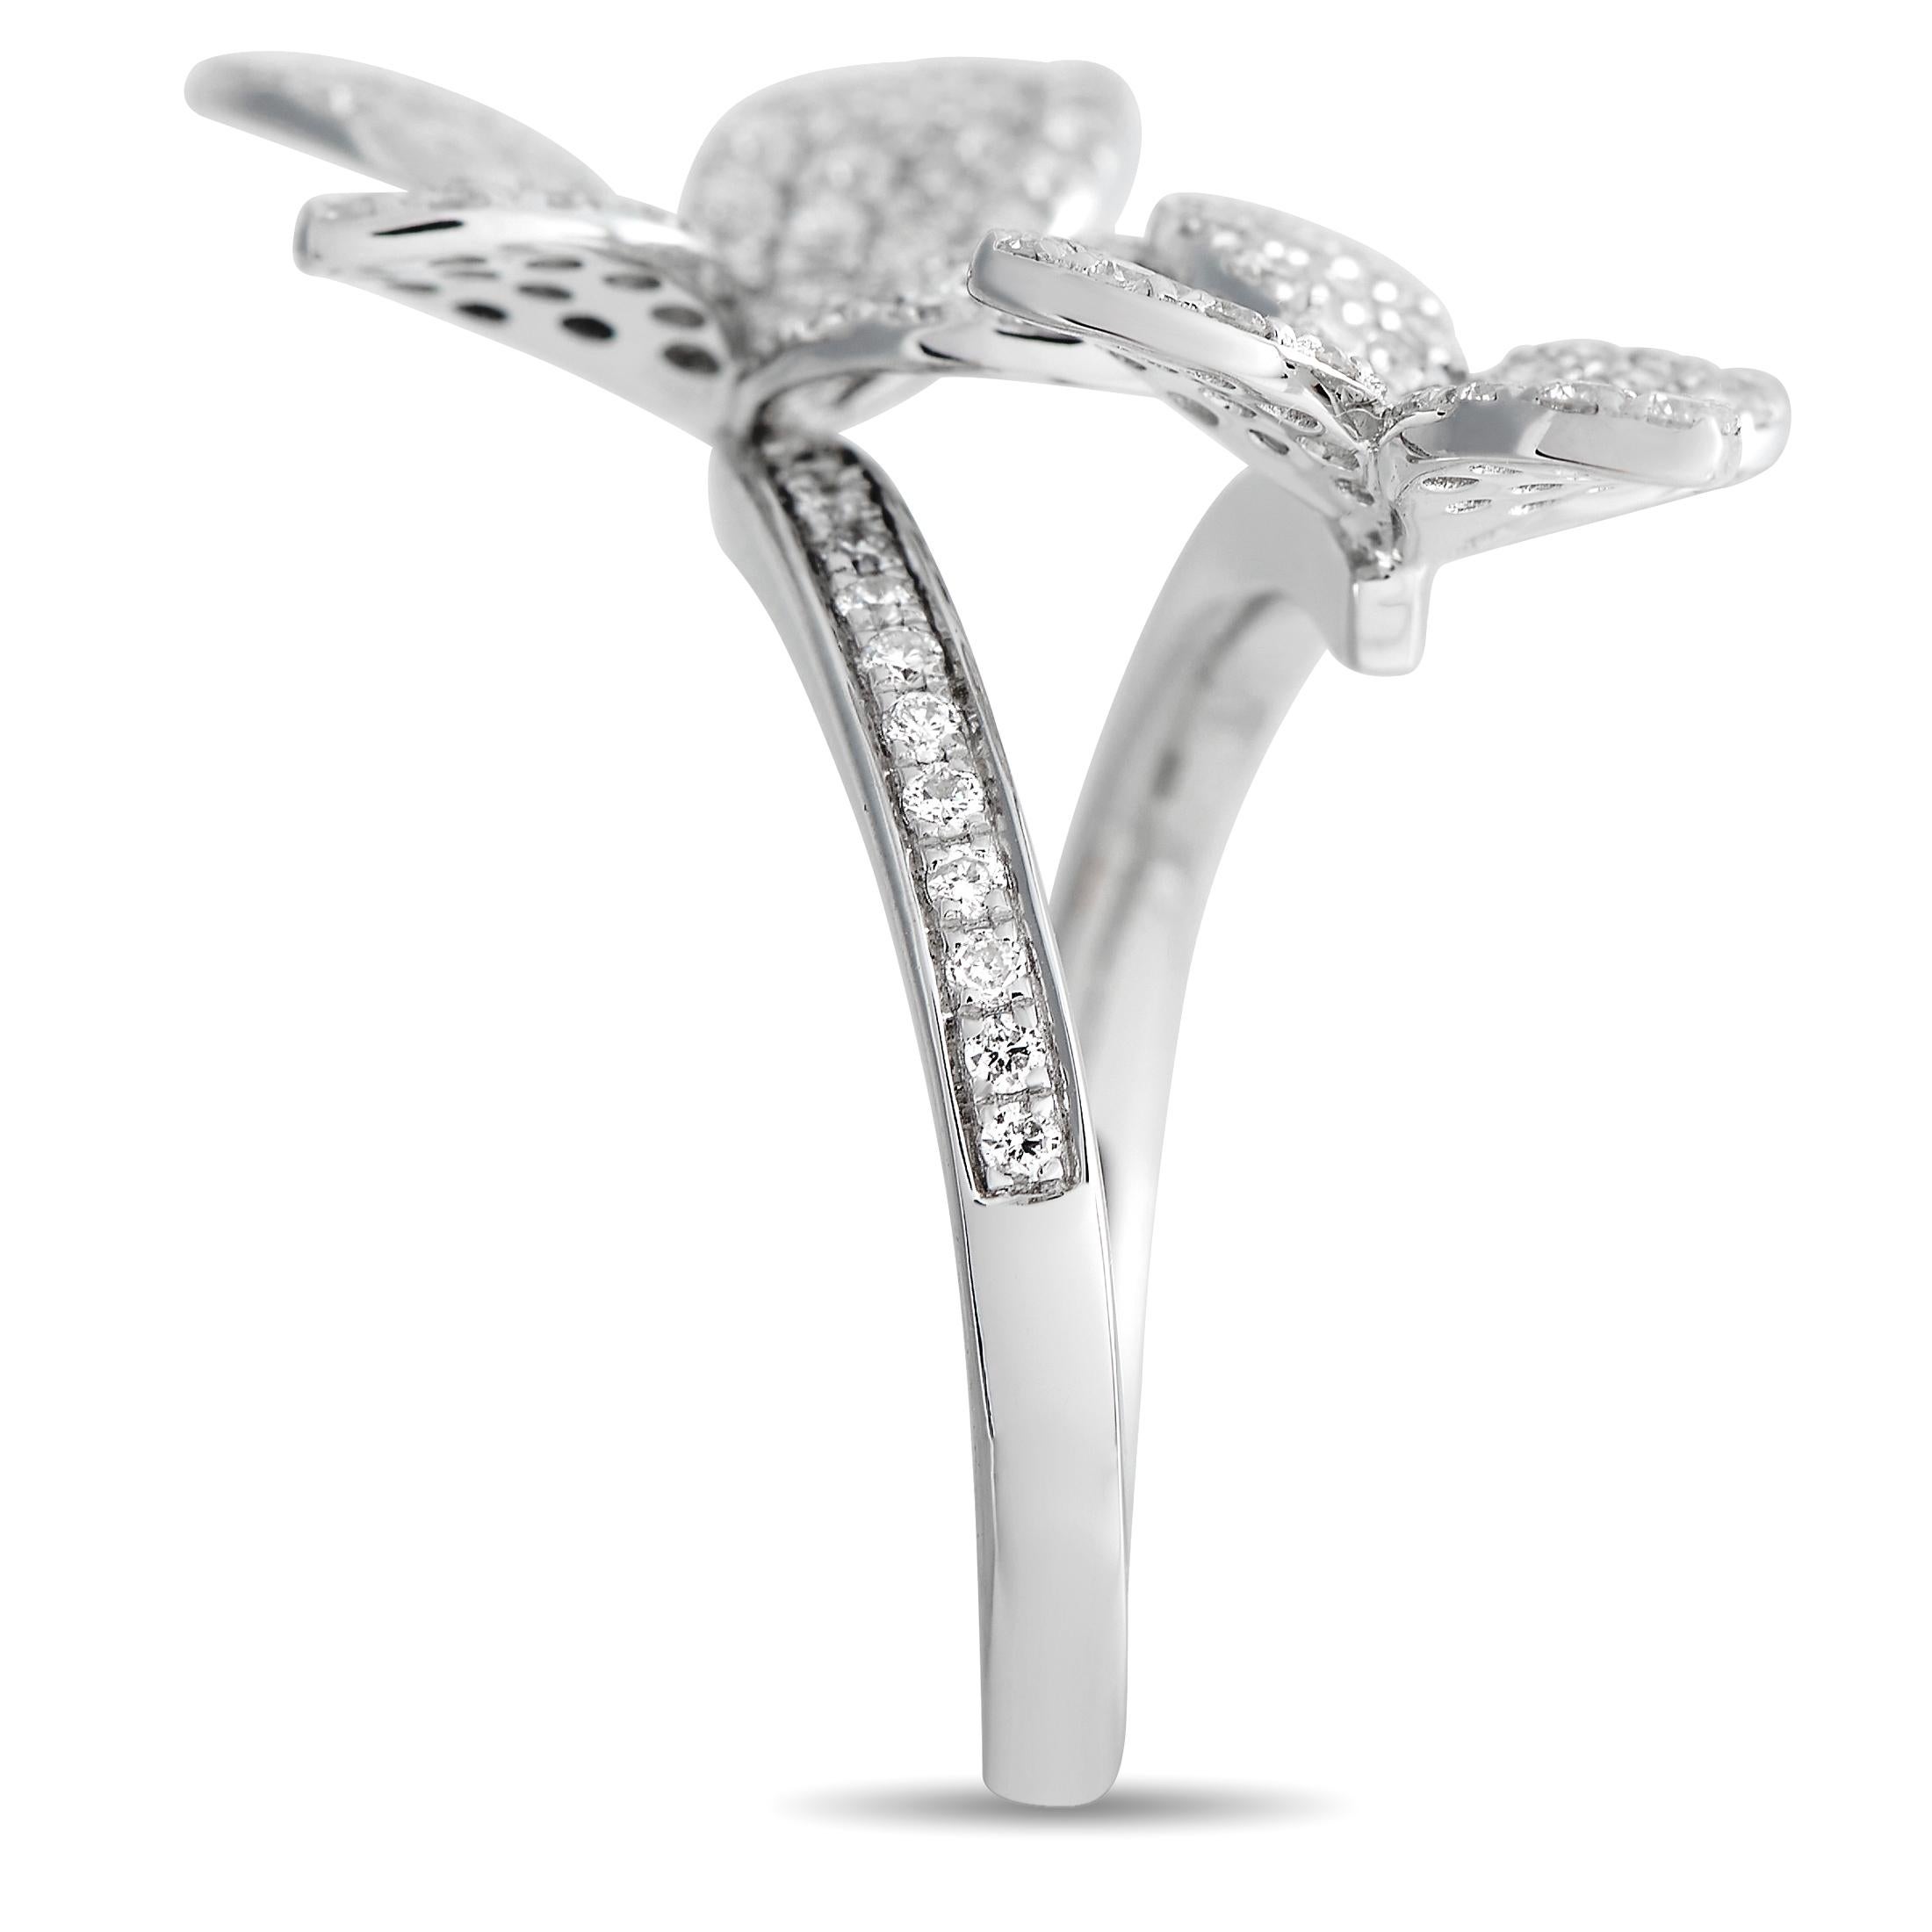 On this luxurious ring, an elegant 18K White Gold setting allows a pair of abstract floral motifs to wind around the finger. This stunning piece of jewelry features a 2mm wide band and a 5mm top height - but it’s the sparkling arrangement of